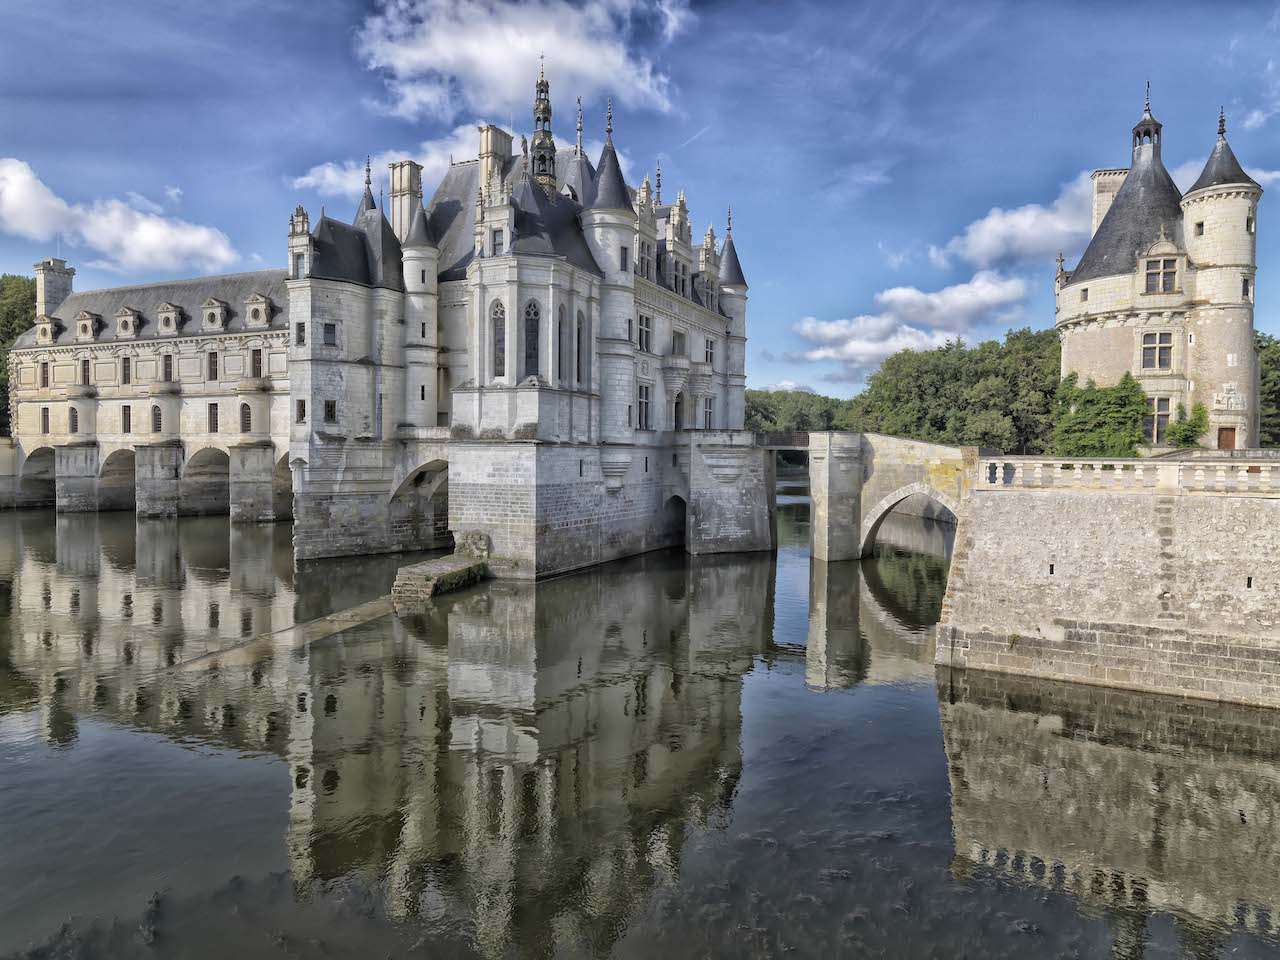 Discover the most beautiful castles in France, from the grandiose Château of Versailles to the intimate Château de Chenonceau.